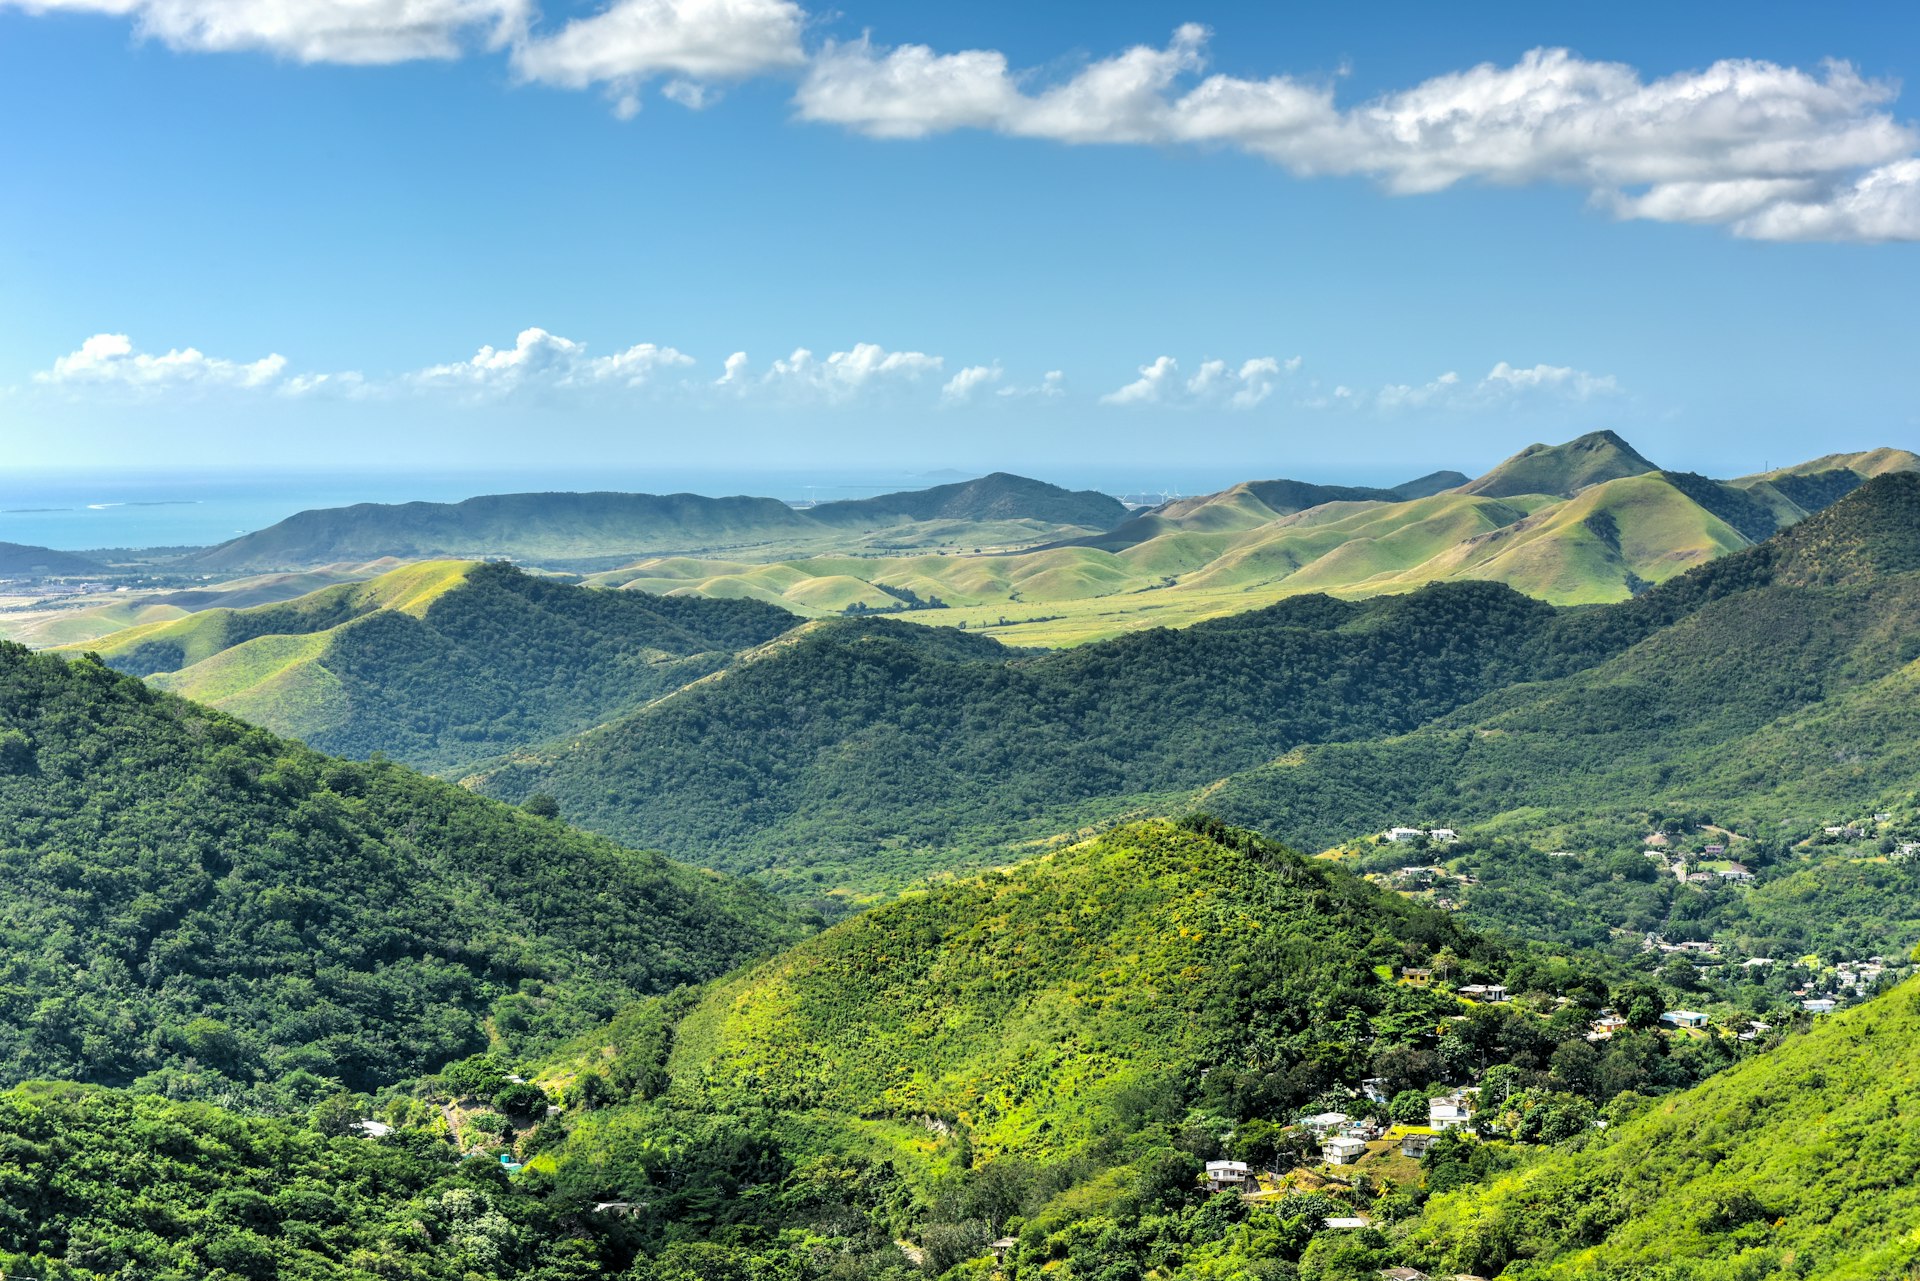 Landscape view of lush tropical hills against a blue sky with the sea in the distance near Salinas, Puerto Rico